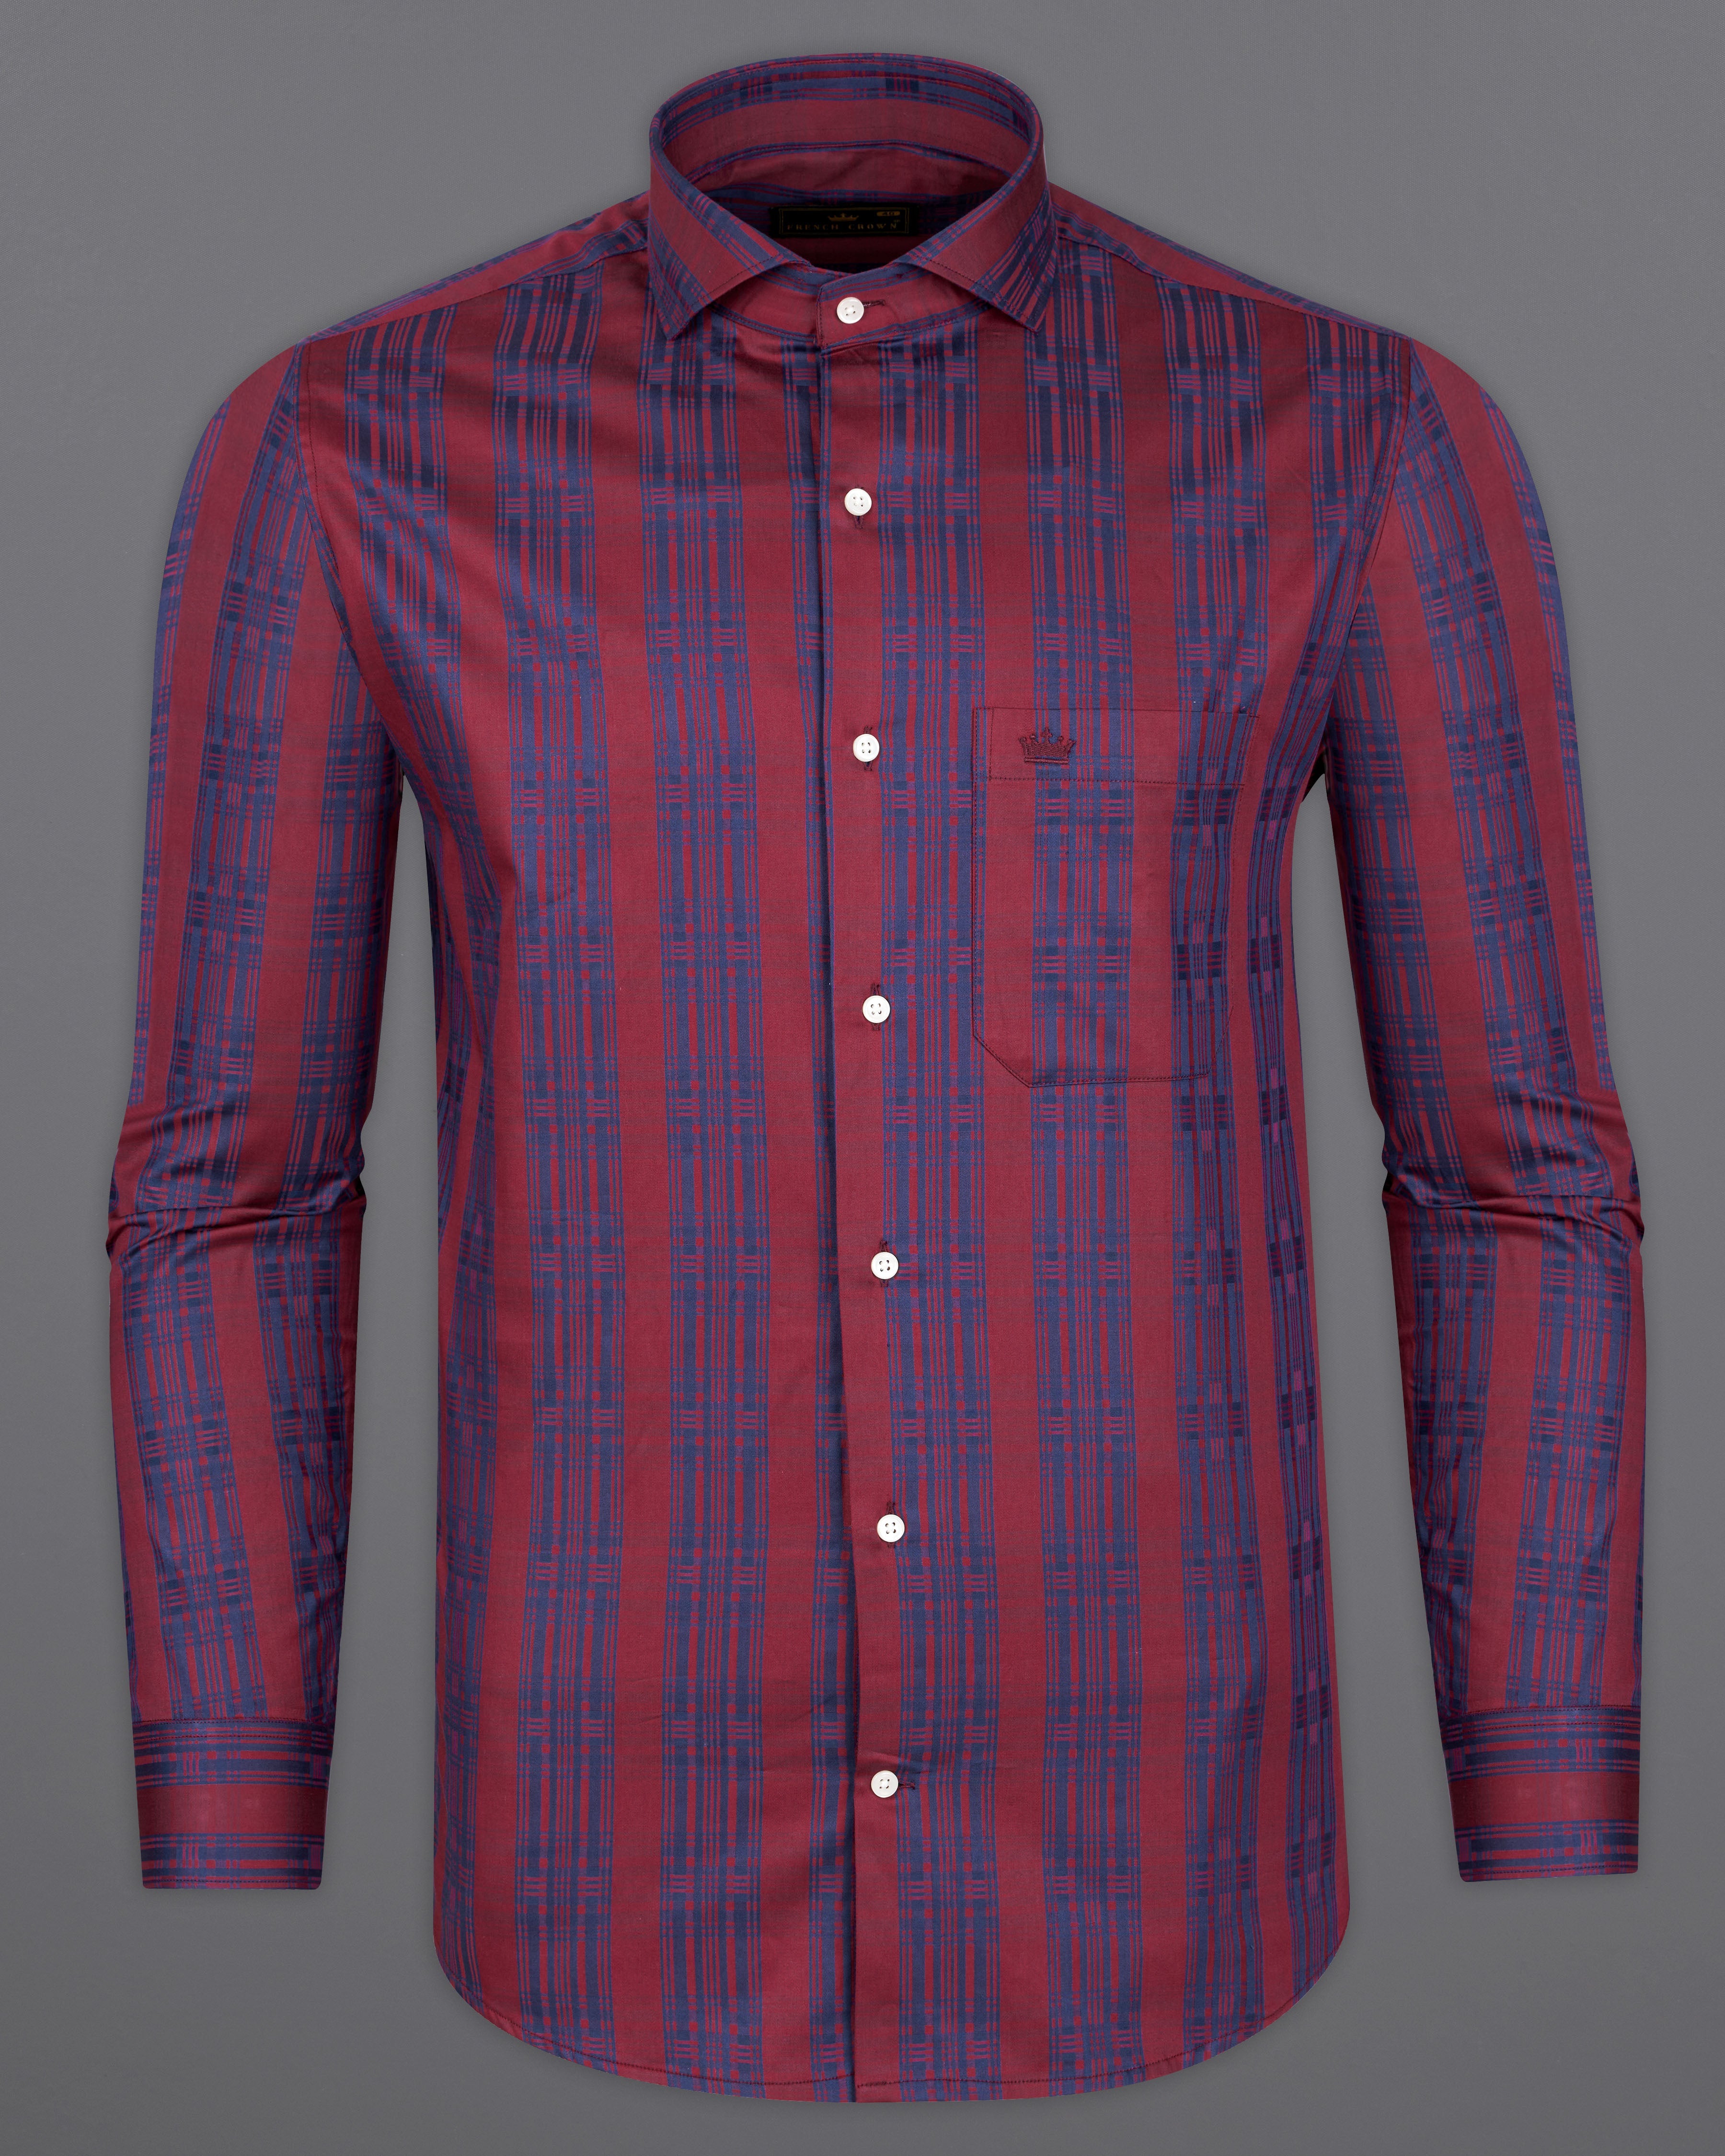 Auburn Red with Fiord Blue Jacquard Textured Giza Cotton Shirt 9611-CA-38,9611-CA-H-38,9611-CA-39,9611-CA-H-39,9611-CA-40,9611-CA-H-40,9611-CA-42,9611-CA-H-42,9611-CA-44,9611-CA-H-44,9611-CA-46,9611-CA-H-46,9611-CA-48,9611-CA-H-48,9611-CA-50,9611-CA-H-50,9611-CA-52,9611-CA-H-52